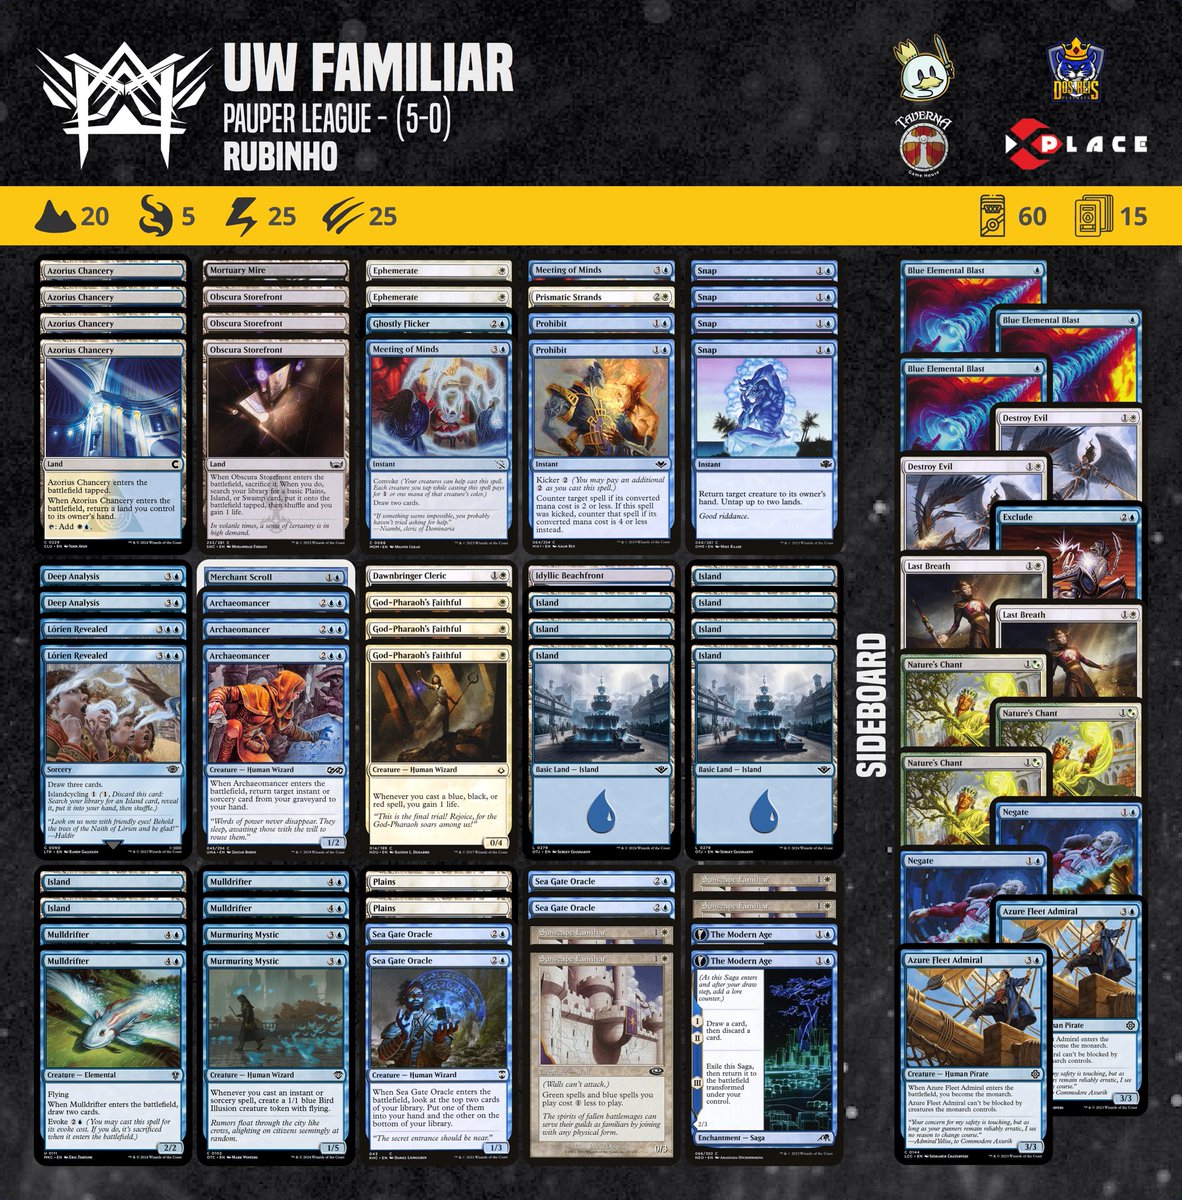 Our athlete Rubinho achieved a 5-0 victory in the Pauper League tournament with this UW Familiar decklist.

#pauper  #magic #mtgcommon #metagamepauper #mtgpauper #magicthegathering #wizardsofthecoast 

@PauperDecklists @fireshoes